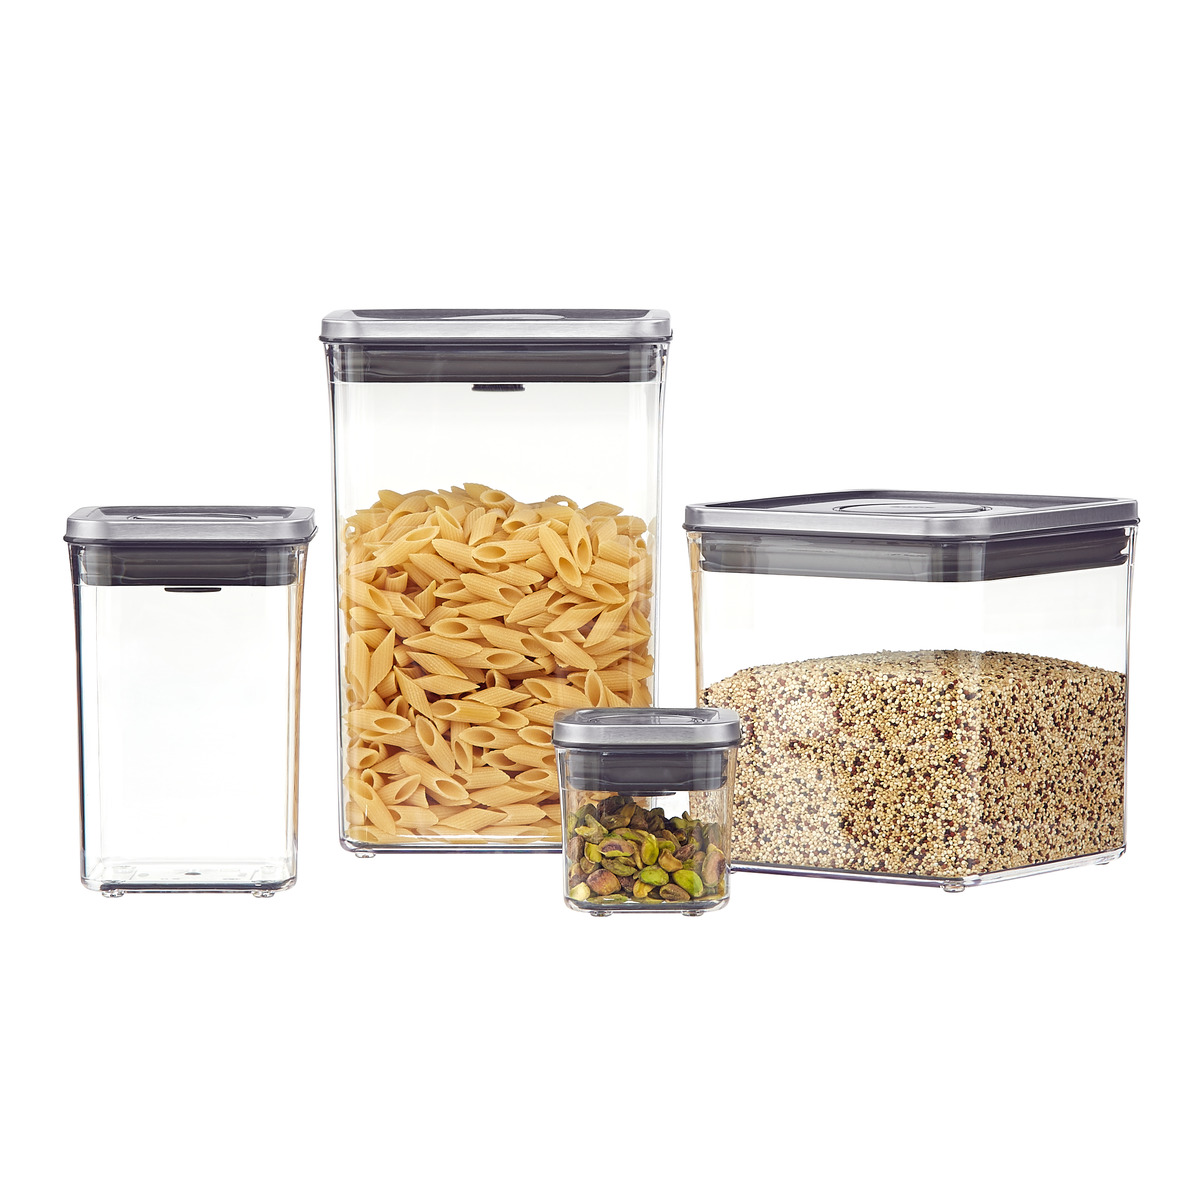 OXO Good Grips POP Container - Big Square Short 2.8 Qt